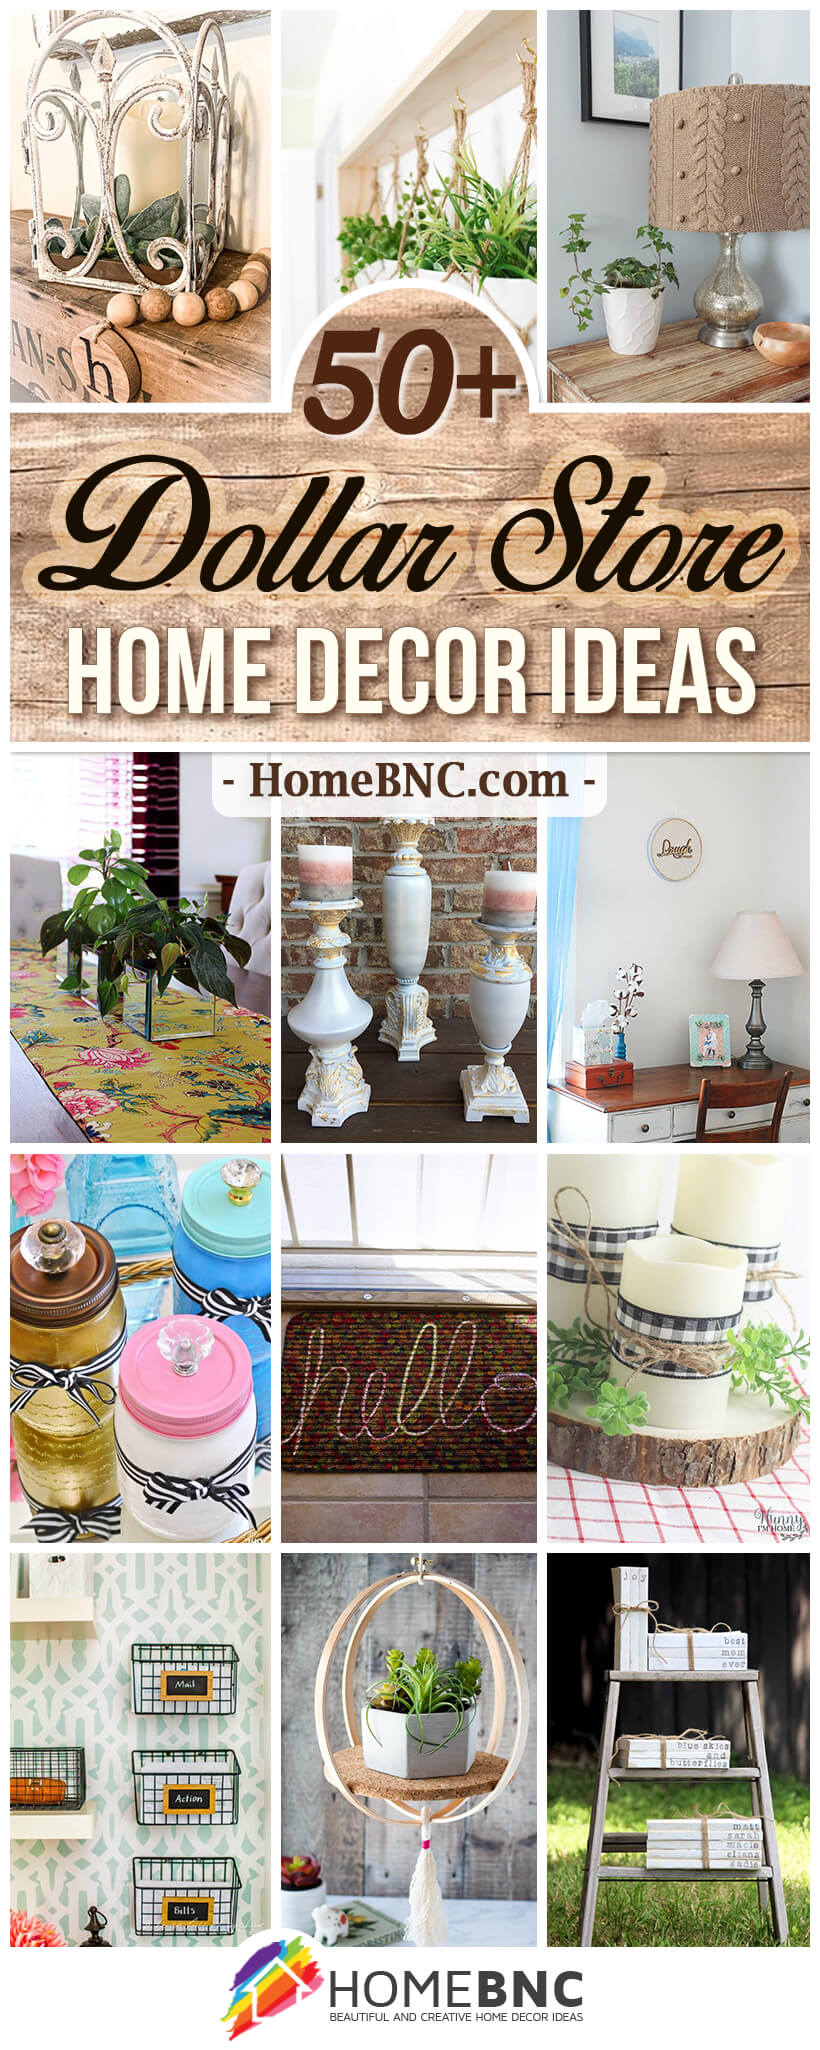 50+ Best DIY Dollar Store Home Decor Ideas and Designs for 2021